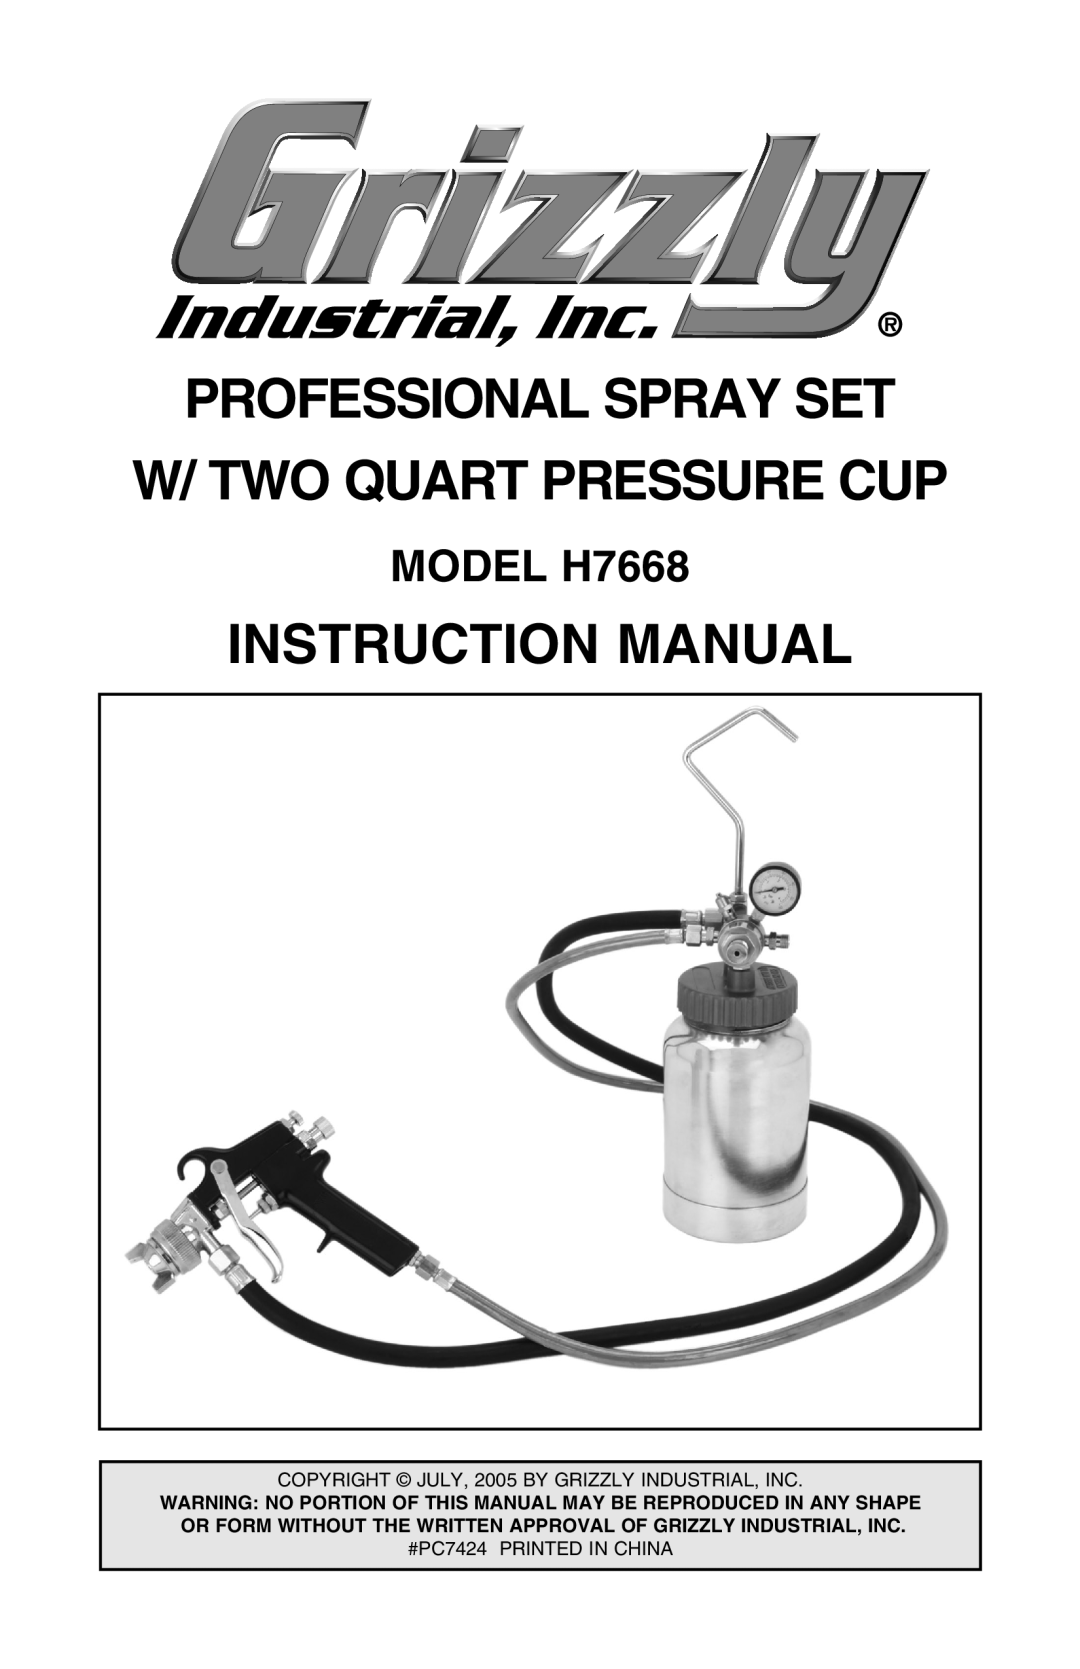 Grizzly instruction manual Professional Spray Set W/ Two Quart Pressure Cup, Instruction Manual, MODEL H7668 